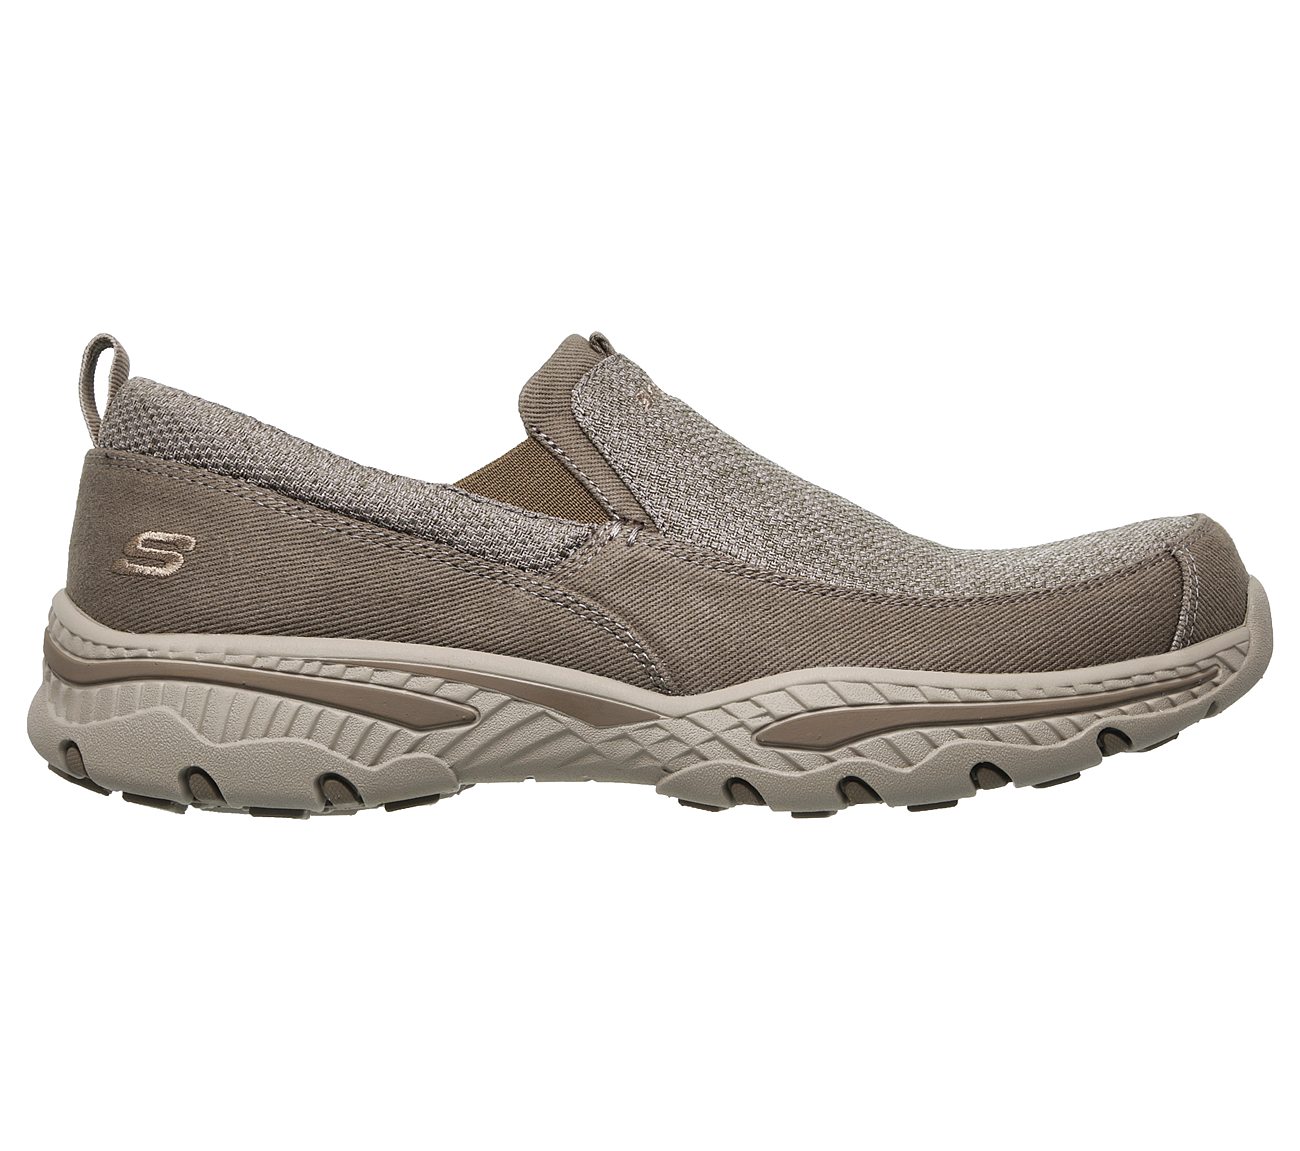 Buy SKECHERS Relaxed Fit: Creston - Erie Relaxed Fit Shoes